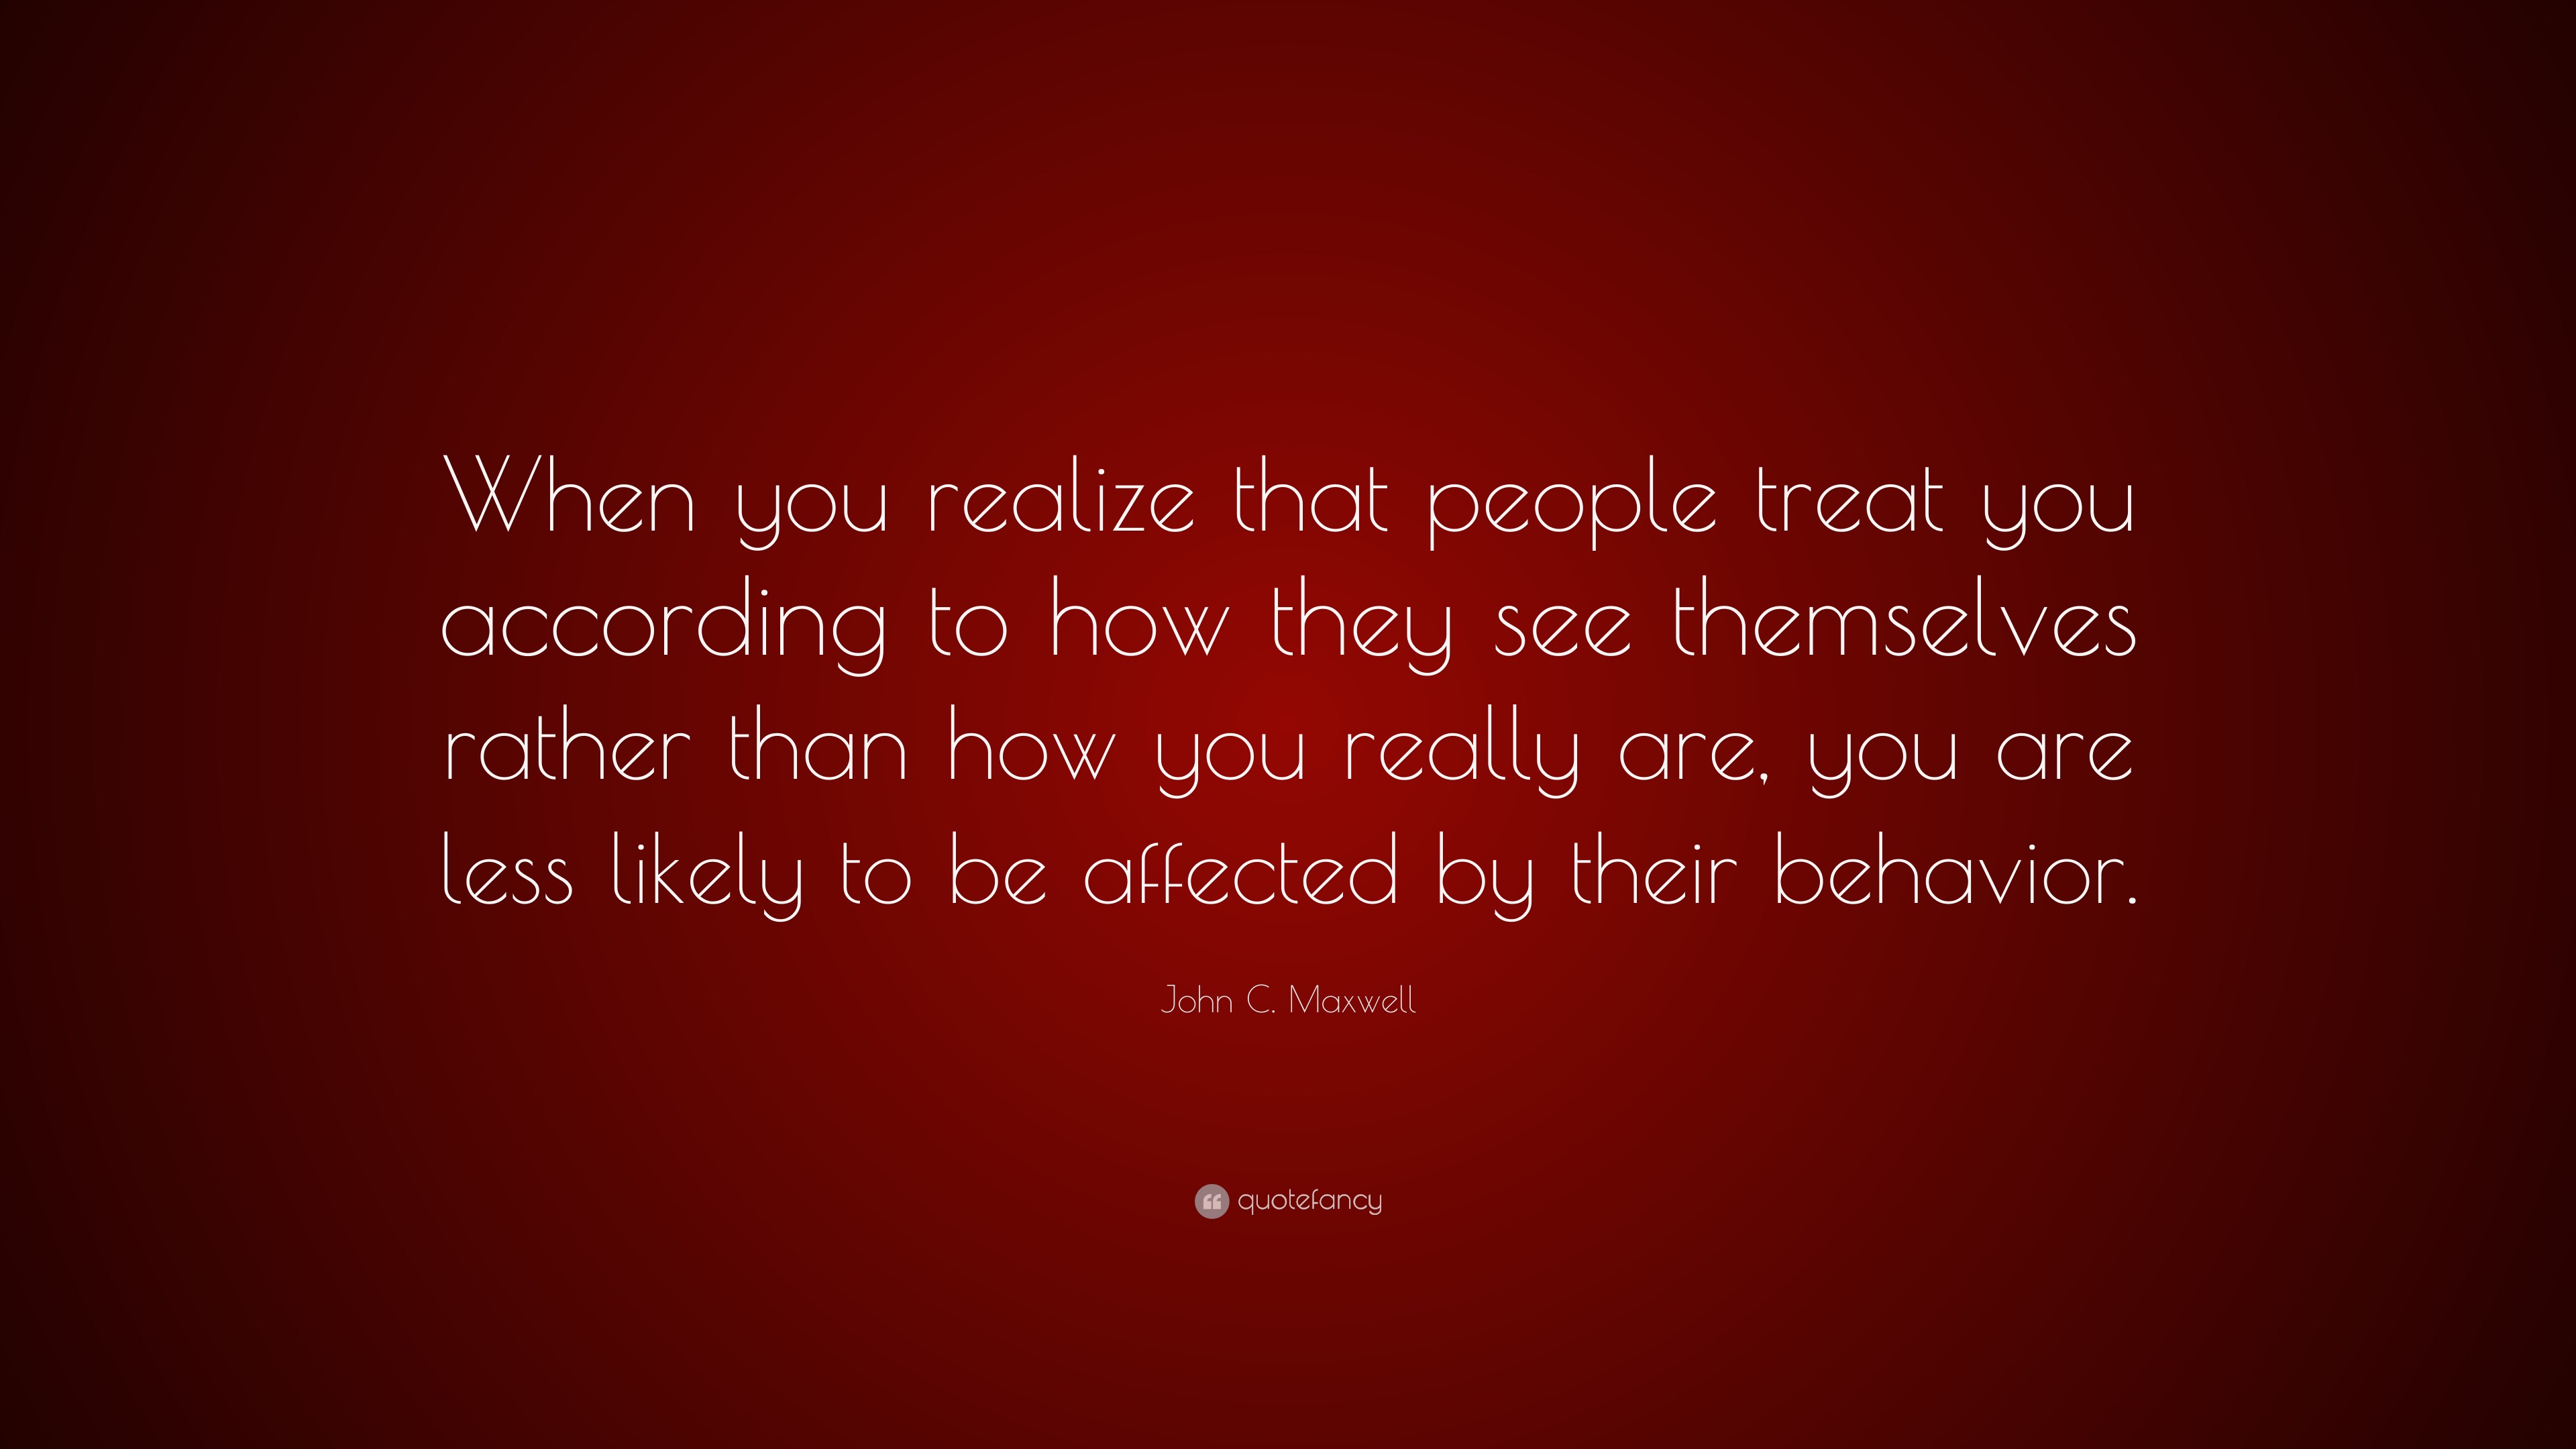 John C. Maxwell Quote: “When you realize that people treat you ...